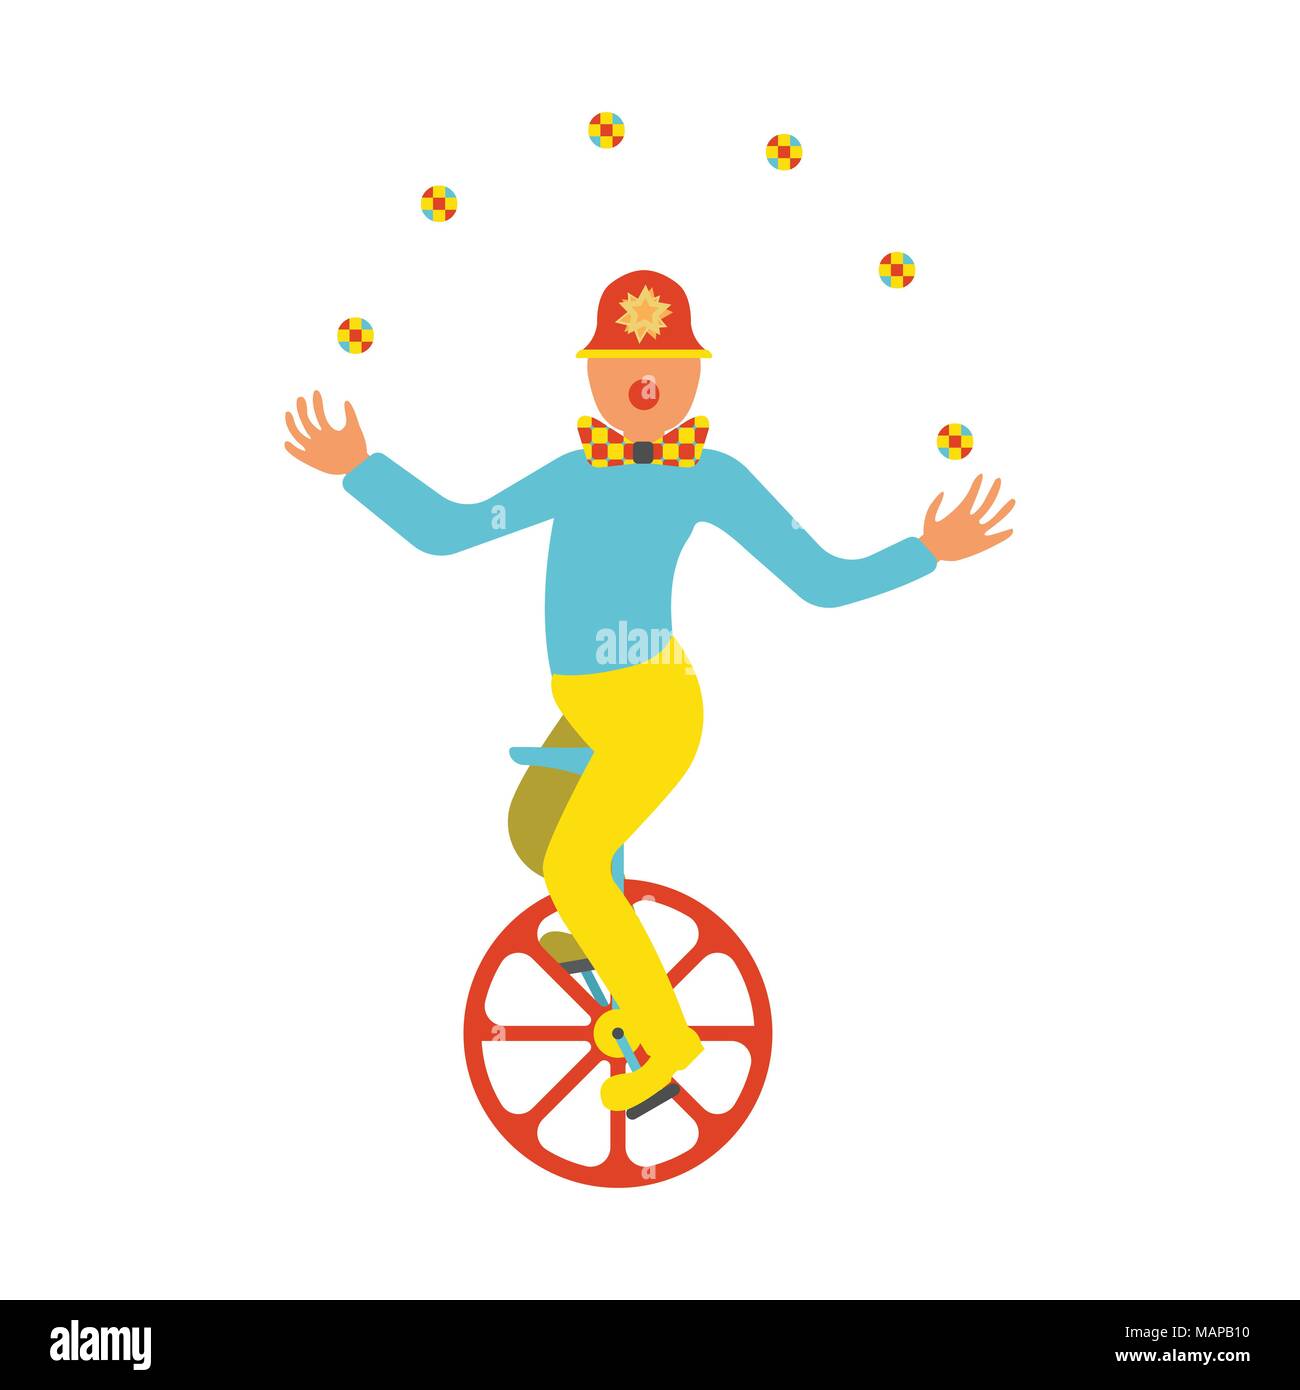 Clown juggler on a unicycle icon. Vintage Vector illustration. Stock Vector